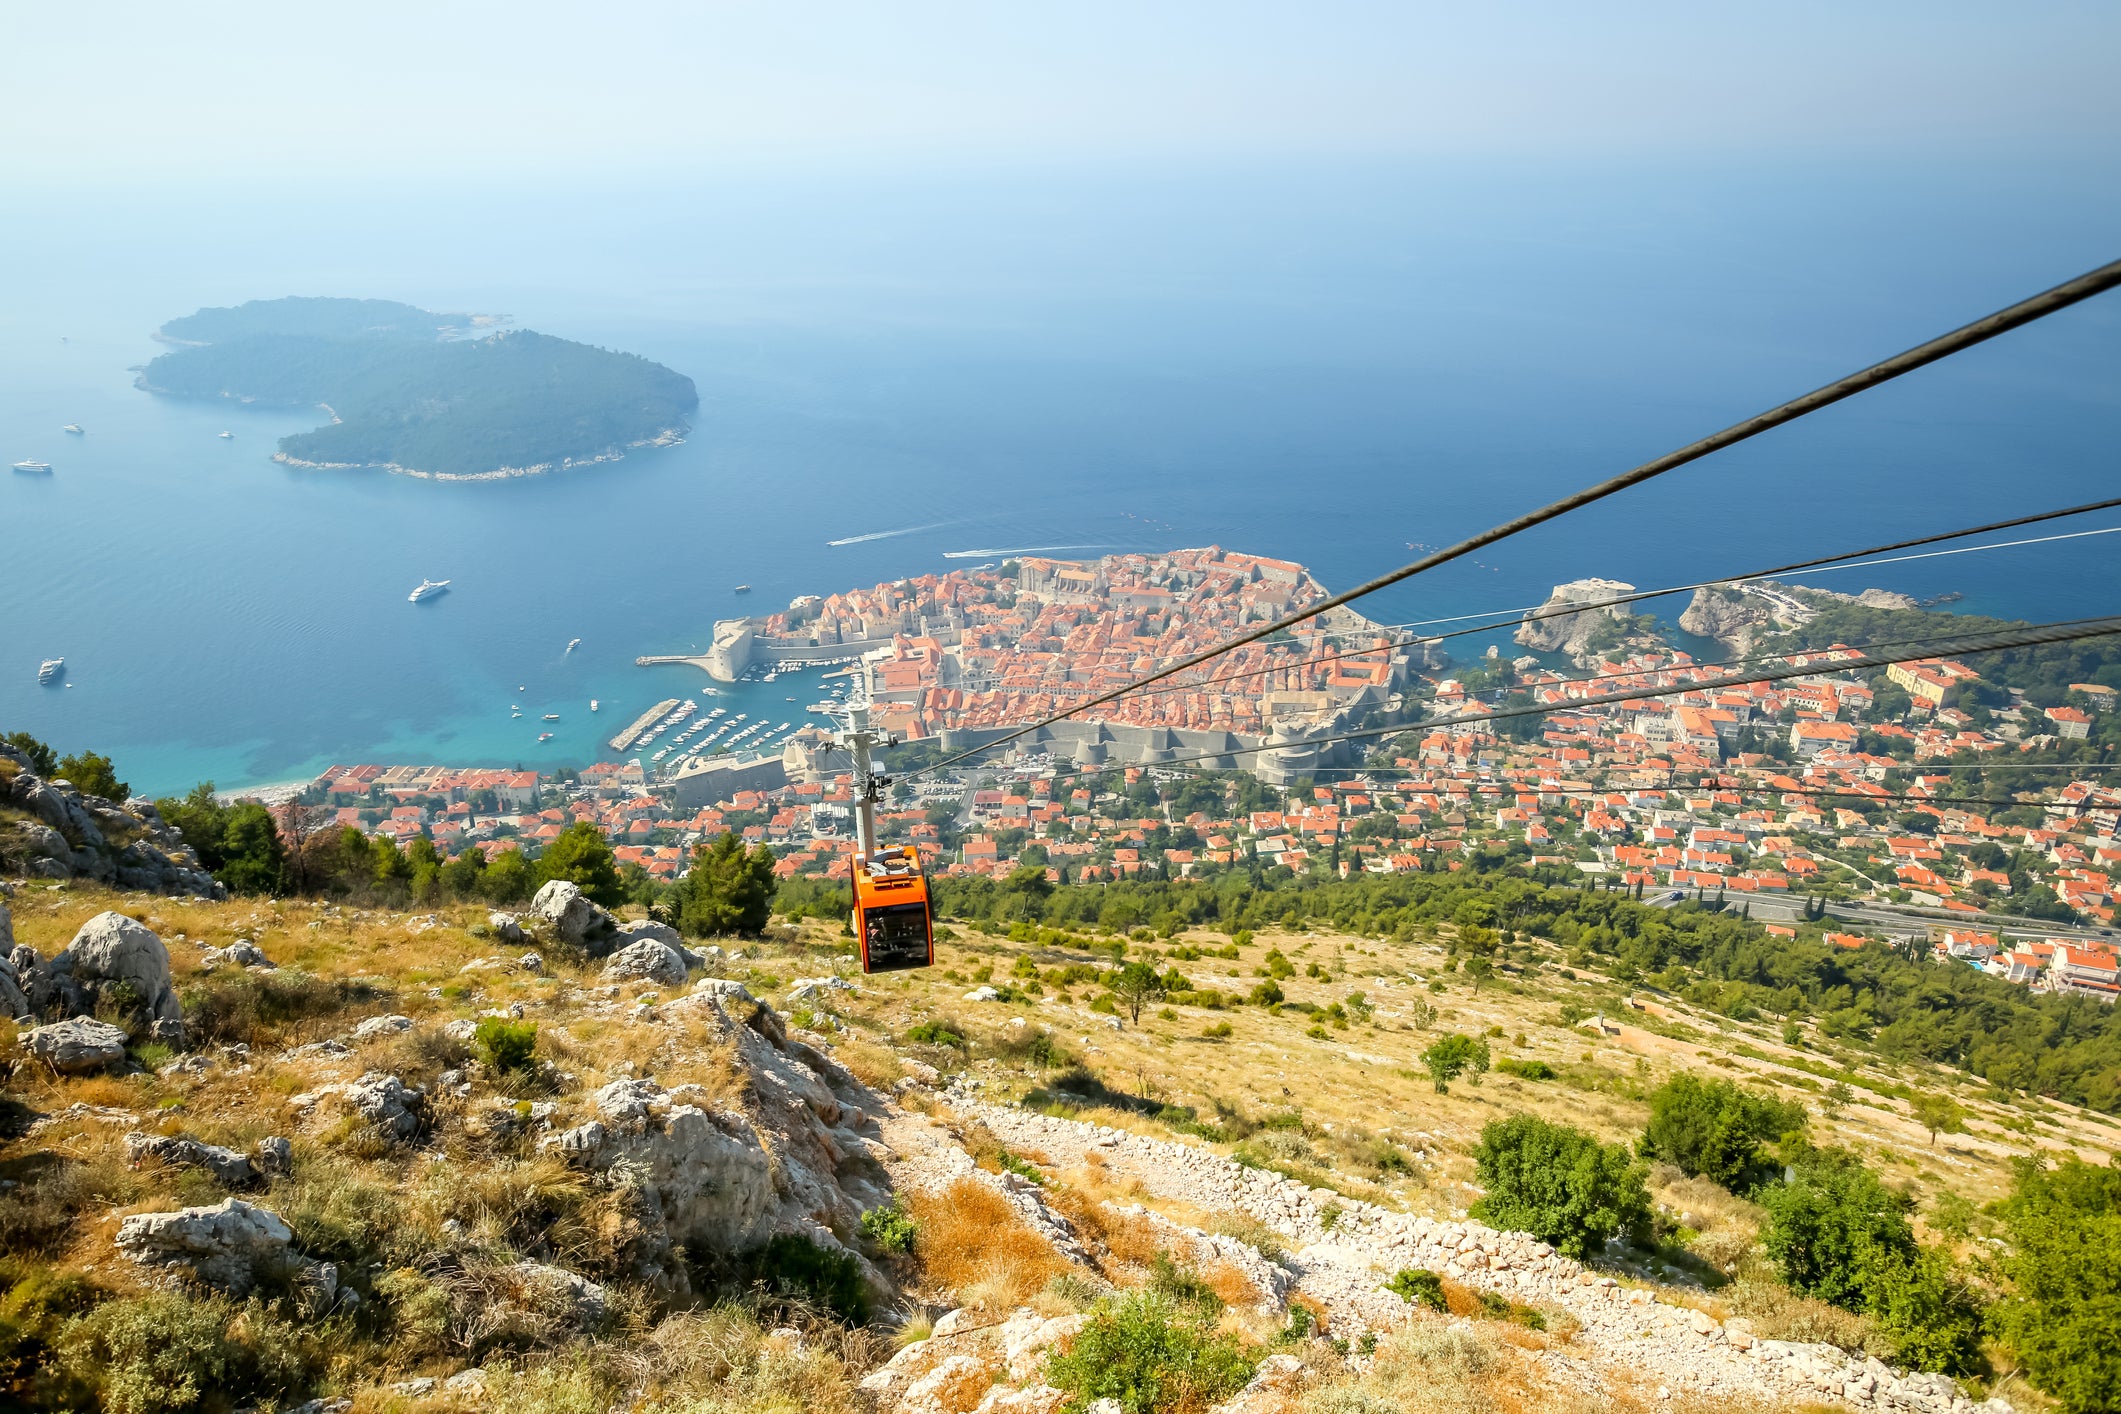 When it opened in 1969, this was the Adriatic’s only cable car